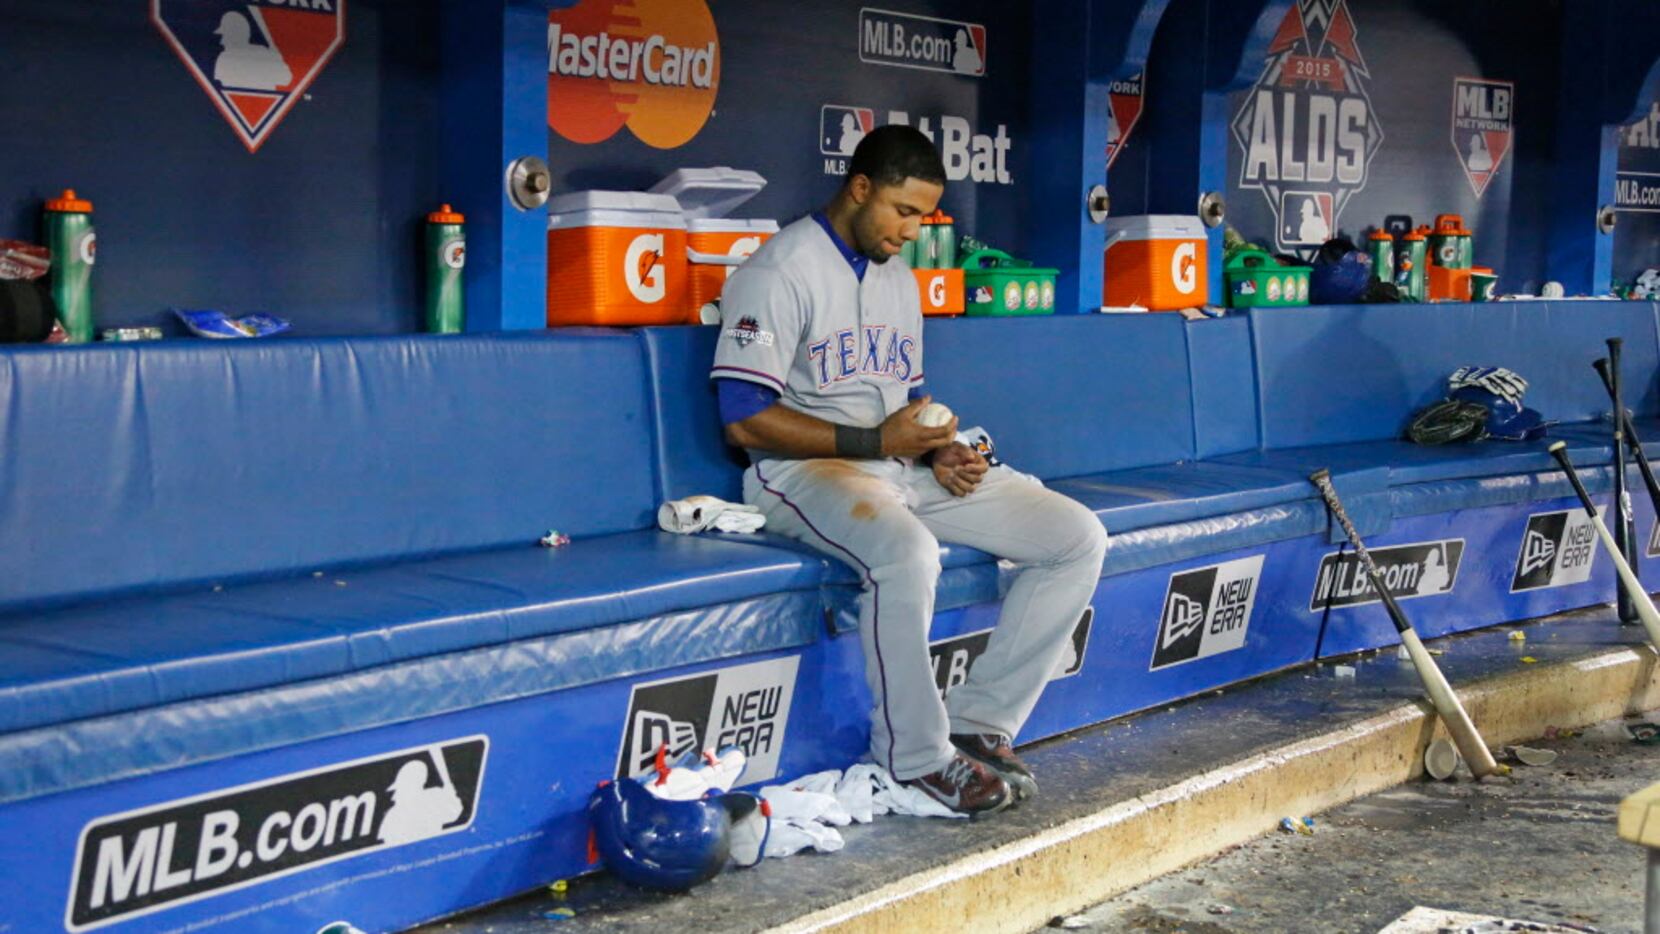 Coming off a down year, Rangers veteran Elvis Andrus has self-improvement  and job security on his mind